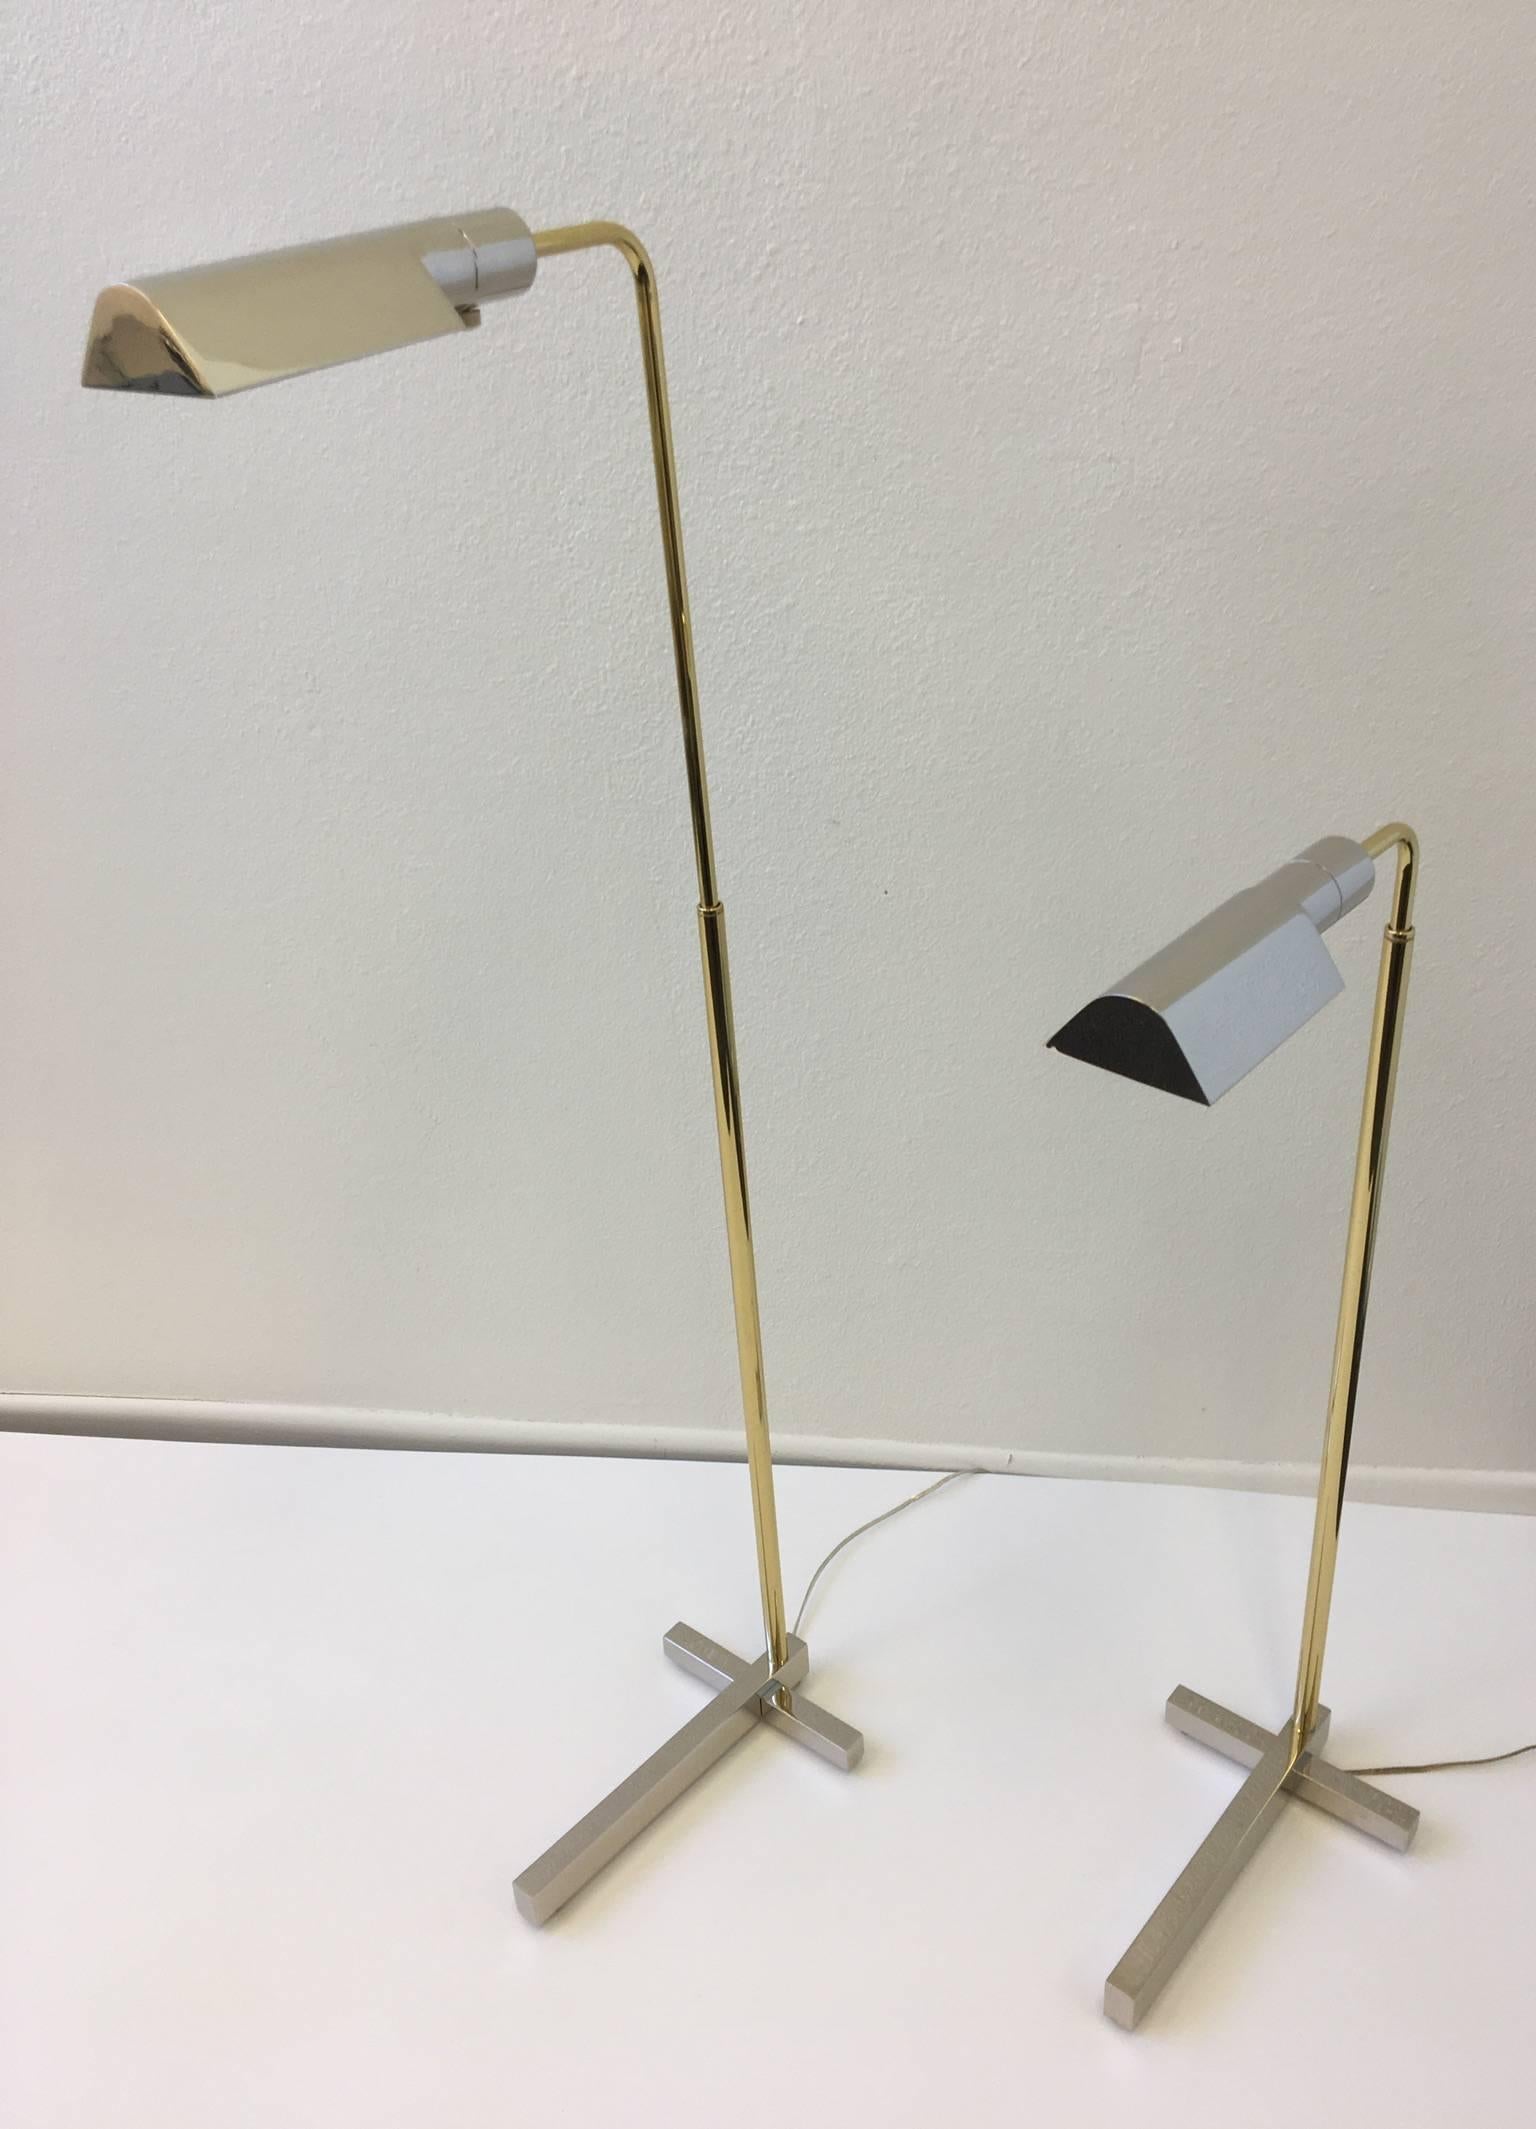 A pair of two tone adjustable floor lamps by Casella.
The lamps have been newly replanted, the base and shade part are polished nickel and the adjustable pole is polished brass.
The lamps have been newly rewired with sockets that are